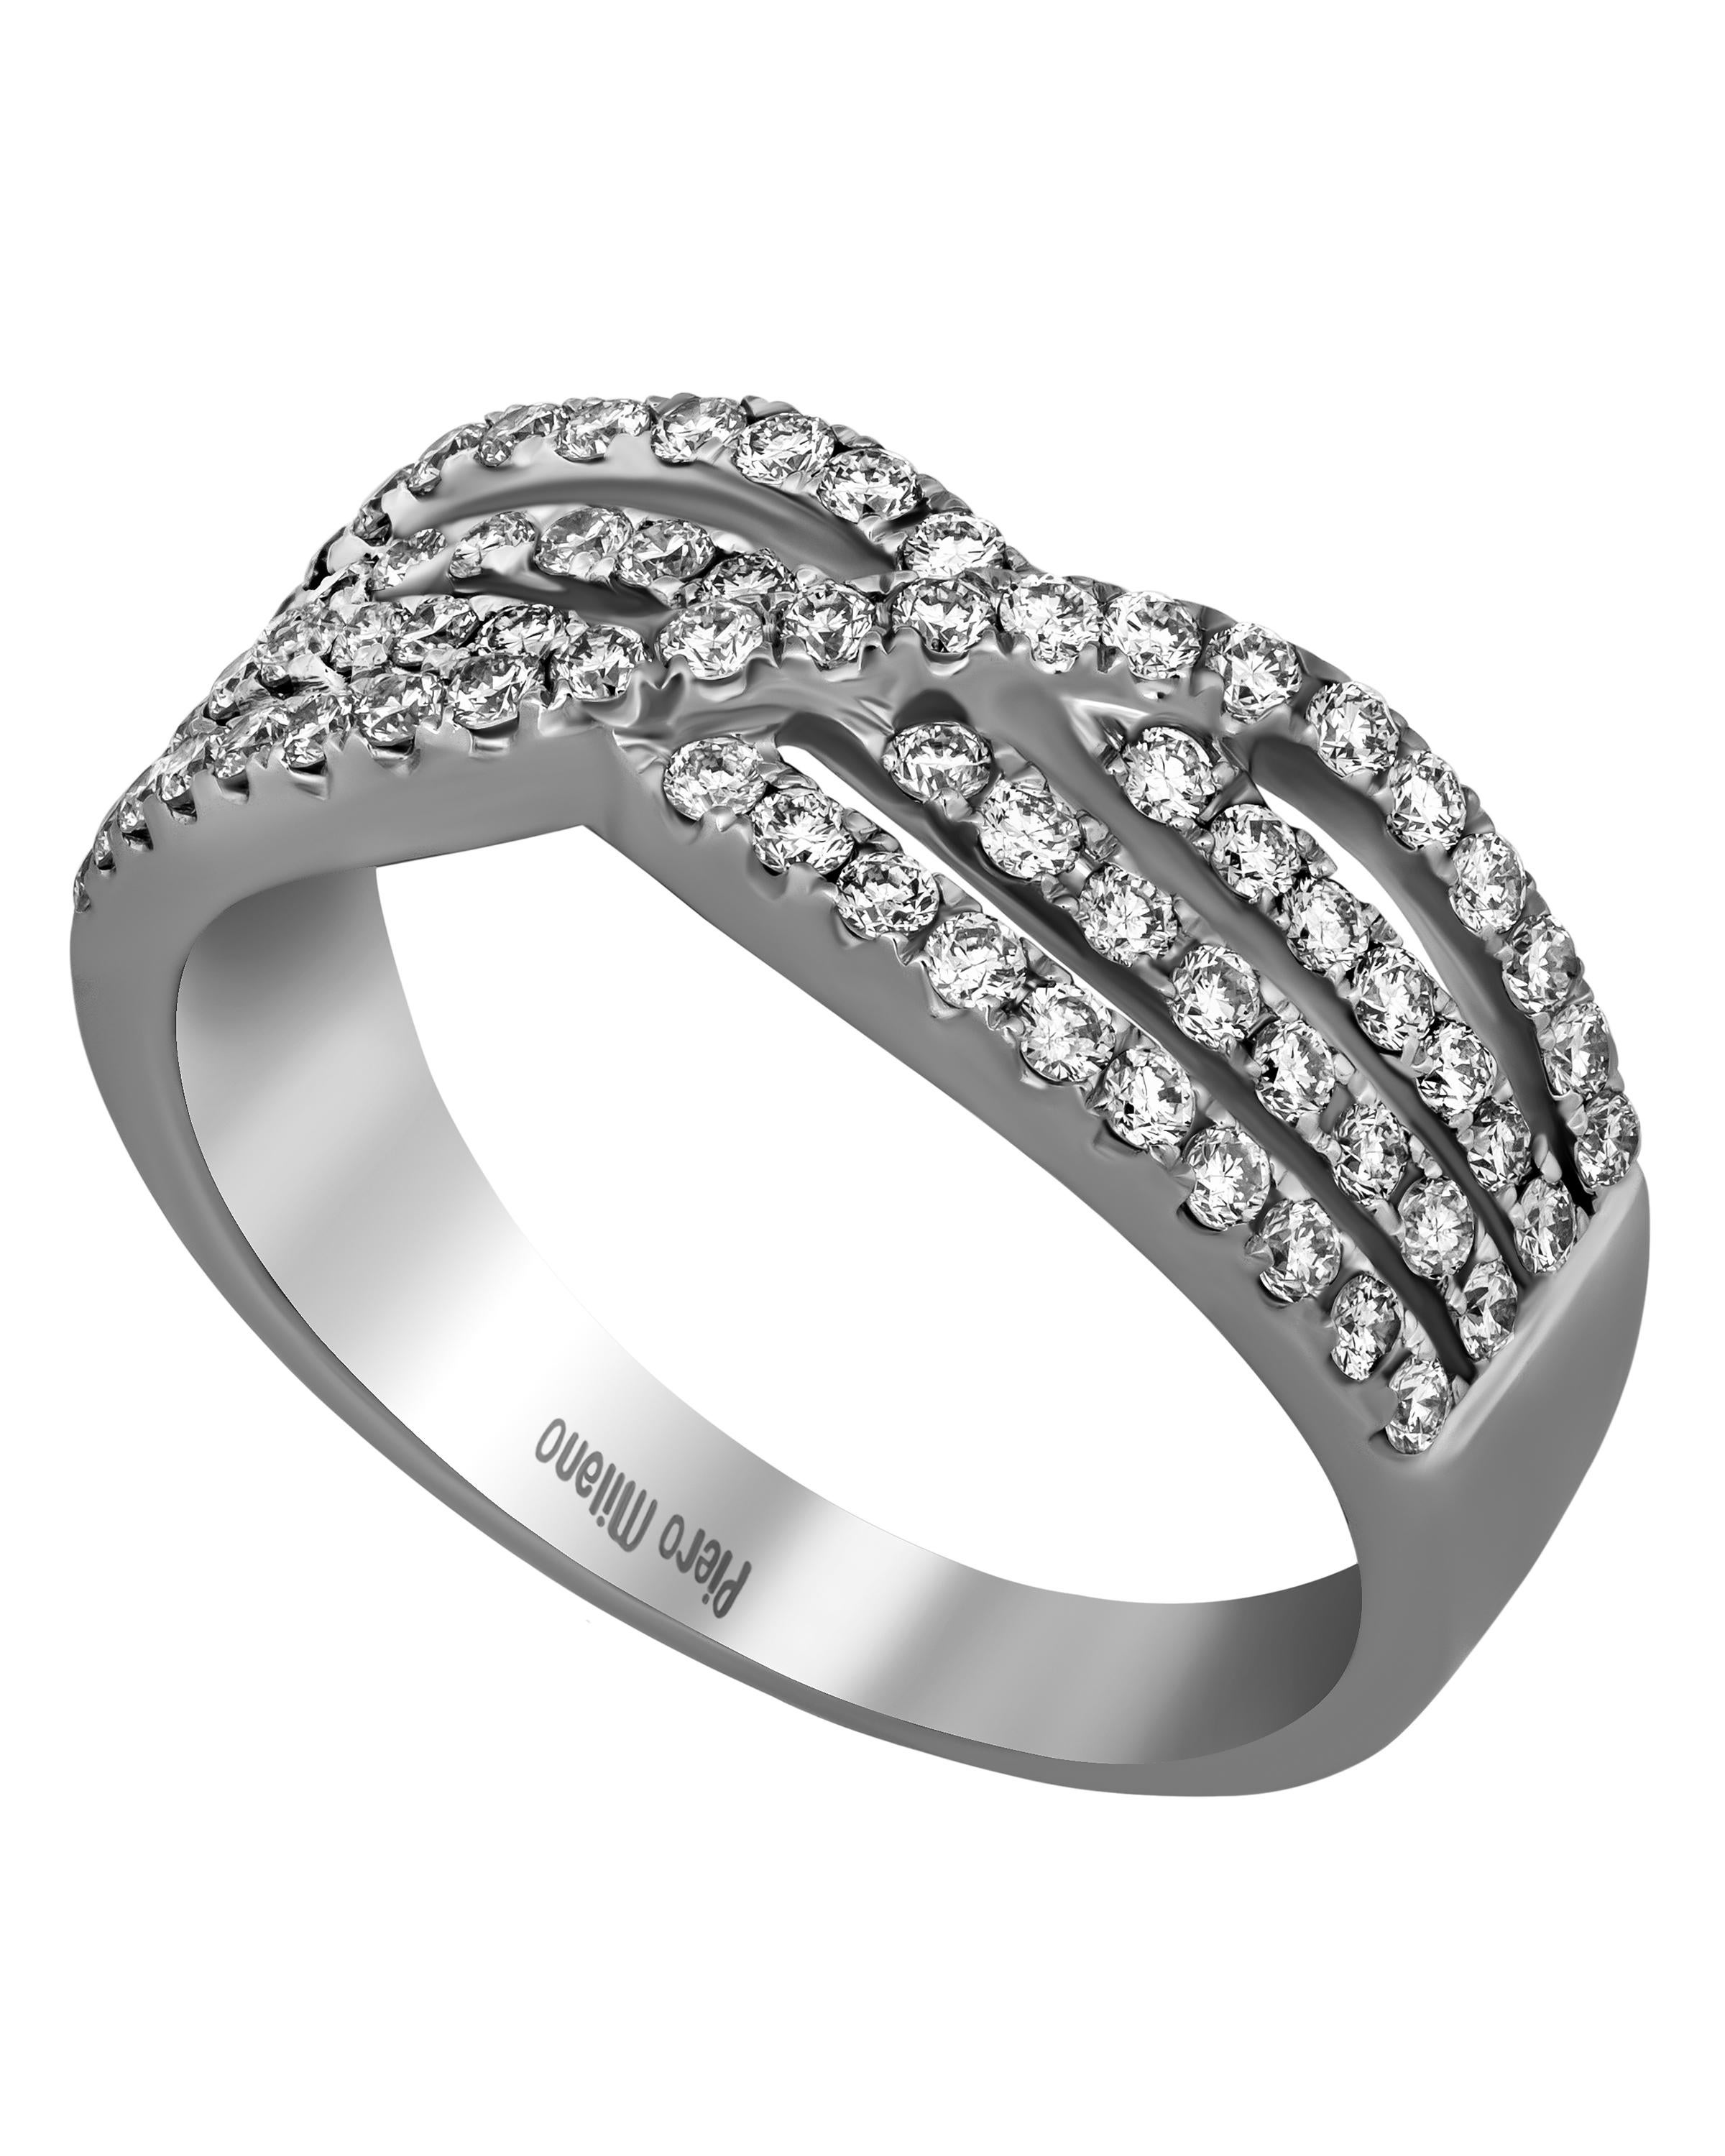 This graceful Piero Milano 18K White Gold Highway Ring features a waved diamond strand overlapping three glittering layers of diamond pave 0.71ct. tw. The ring size is 6.75 (53.8). The Band Width is 7.7mm. The Weight is 5.6g.
